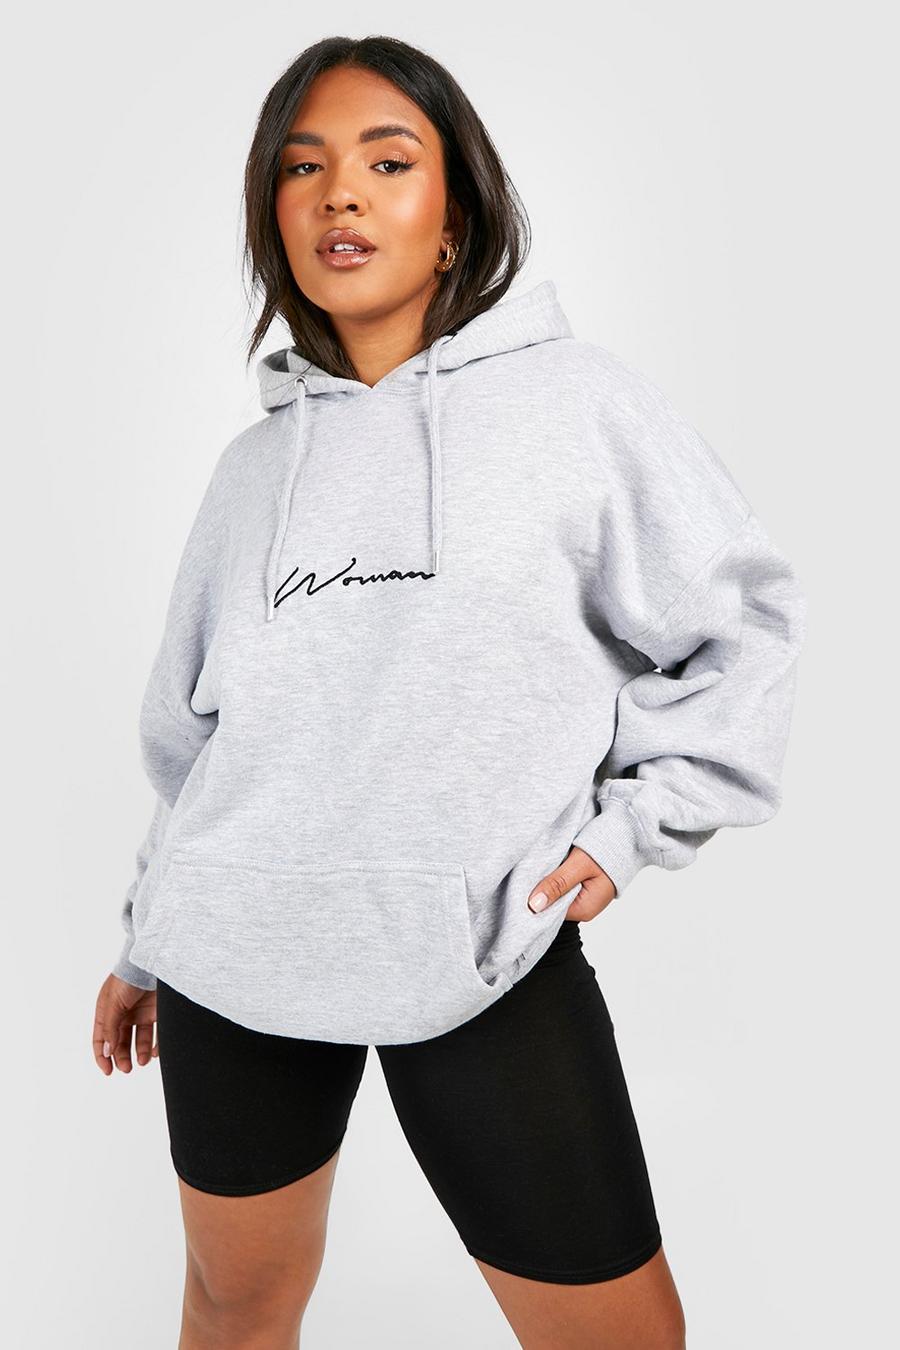 Oversized Hoodie for Teen Girls Jumpers Women Plain Sweatshirts Womens Plus Size Long Sleeve Tops Hooded Pullover Casual 